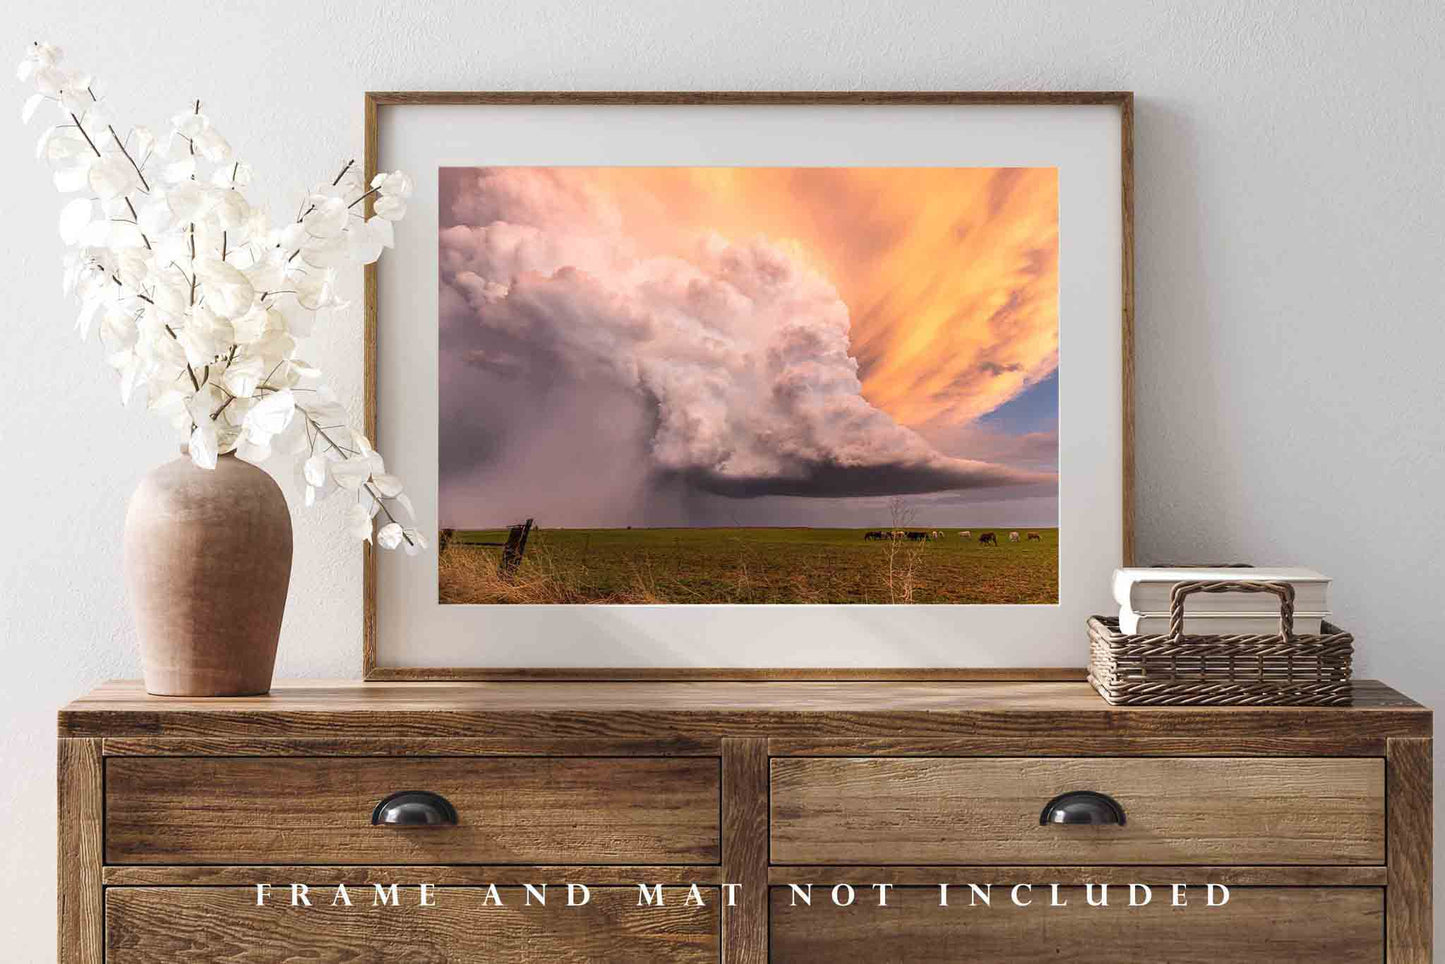 Storm Photography Print (Not Framed) Picture of Supercell Thunderstorm Over Field at Sunset in Kansas Great Plains Wall Art Weather Decor